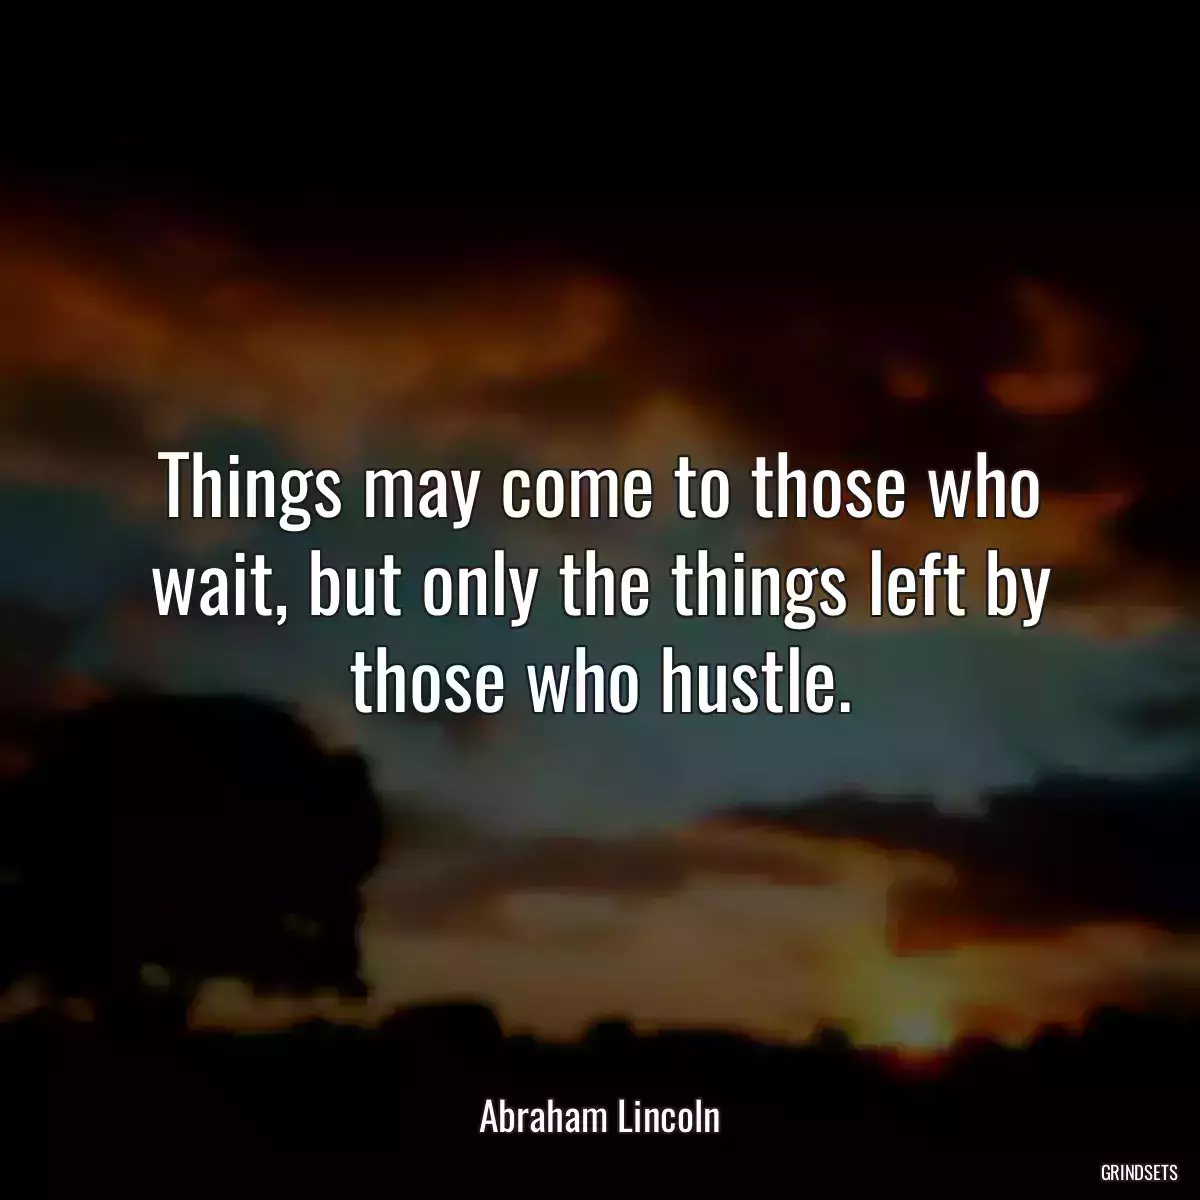 Things may come to those who wait, but only the things left by those who hustle.